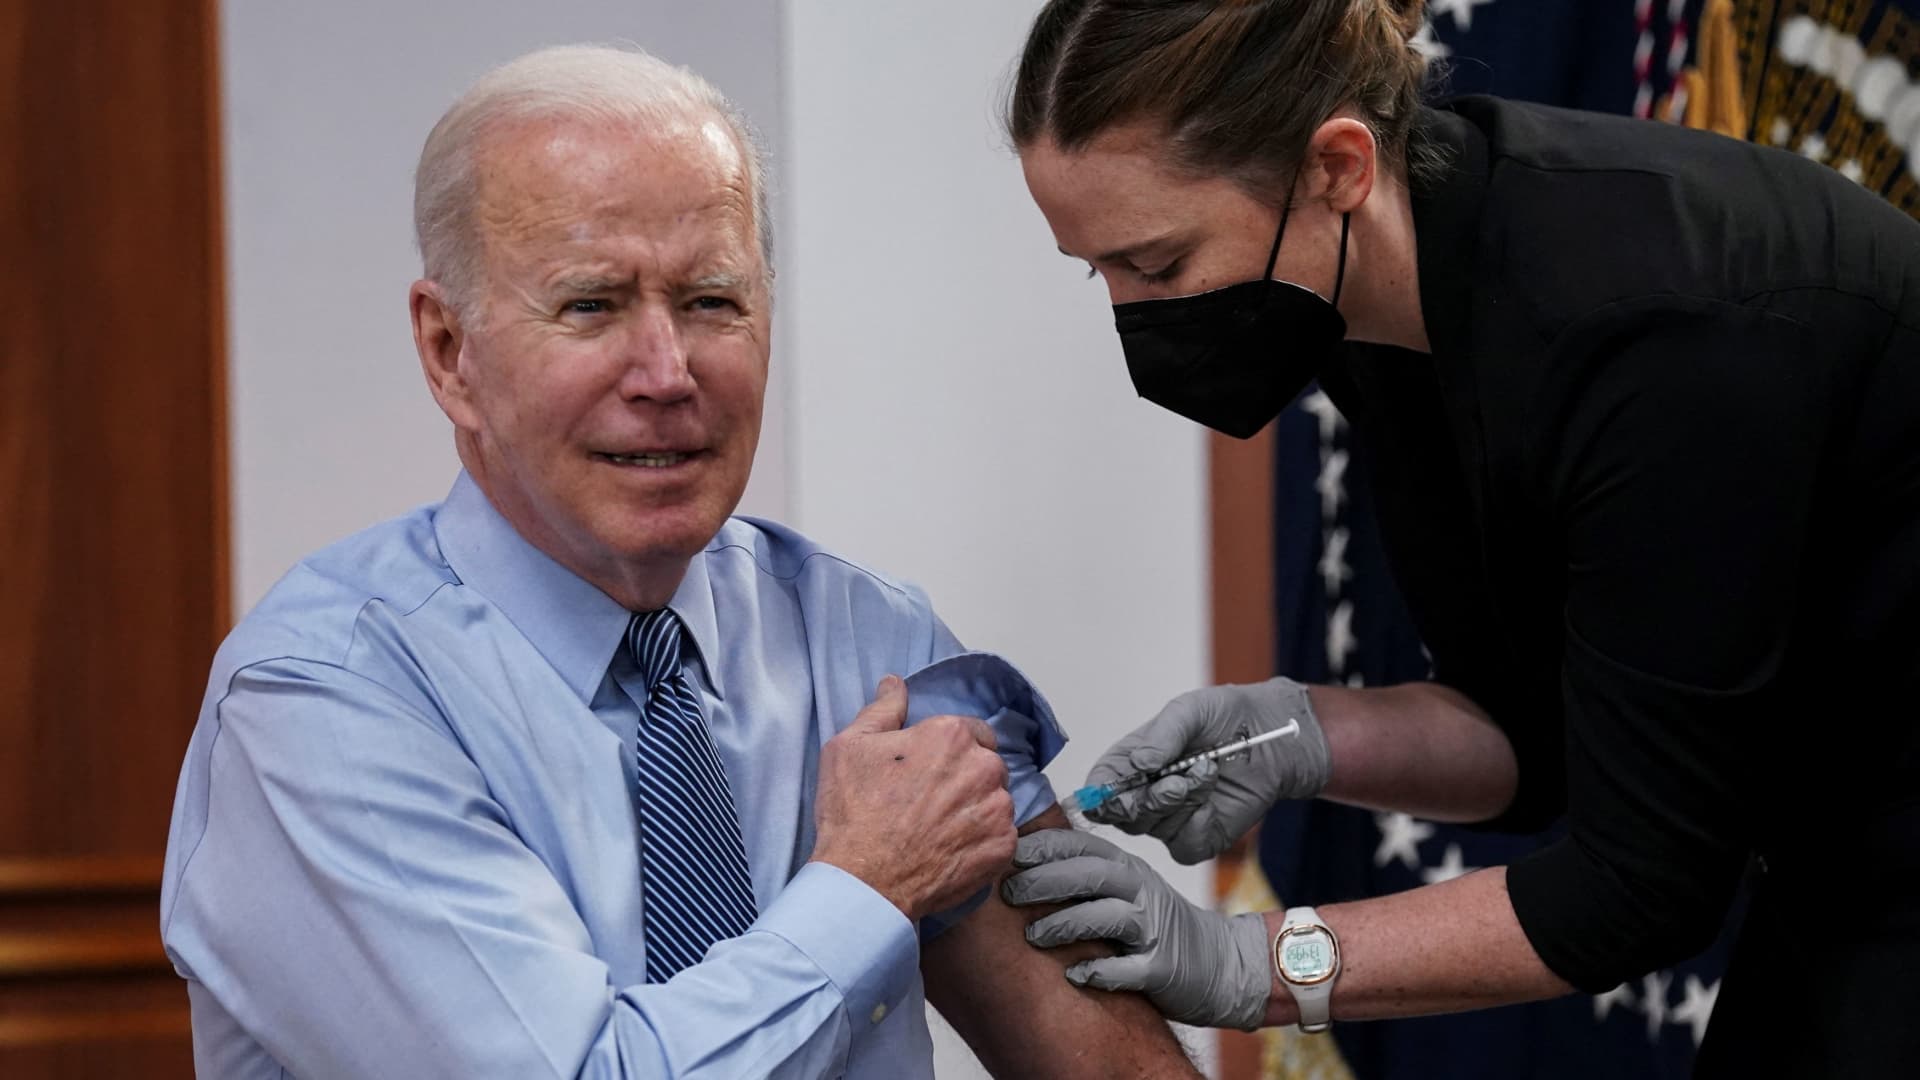 Biden warns U.S. won’t have enough Covid vaccine shots without aid from Congress